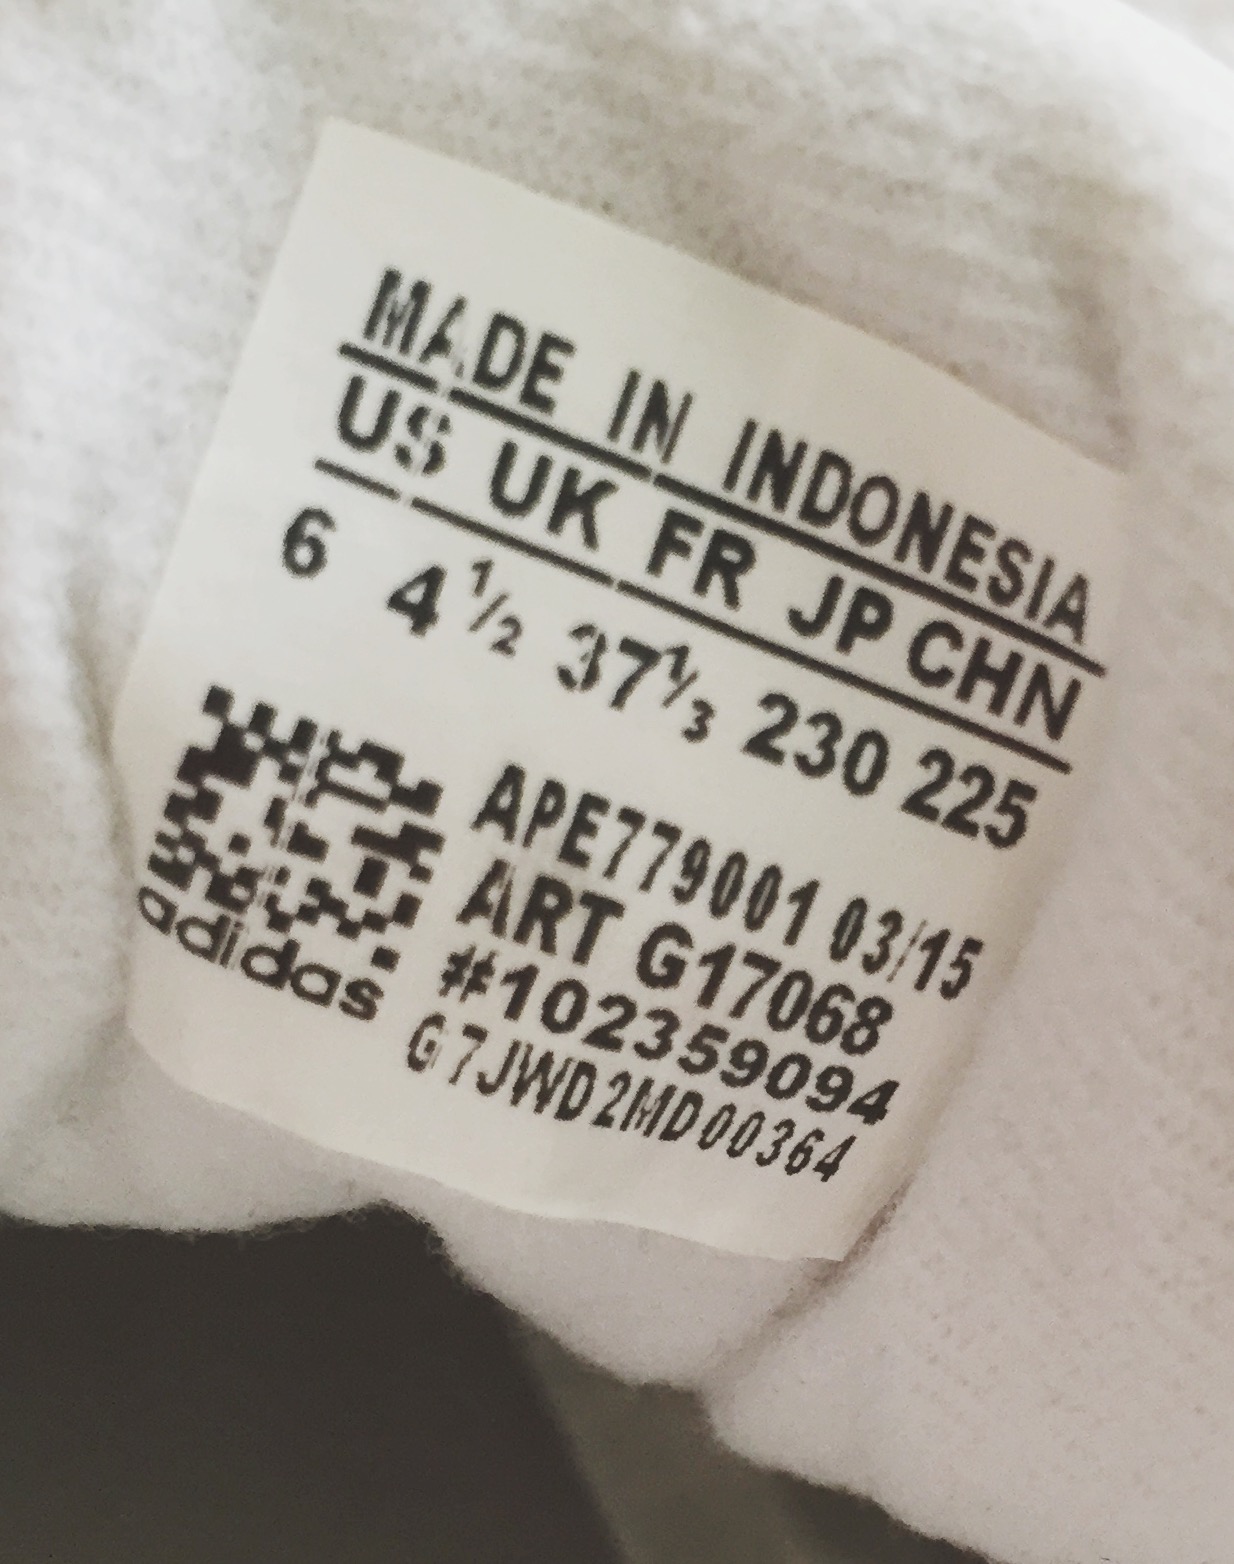 adidas product number on tag